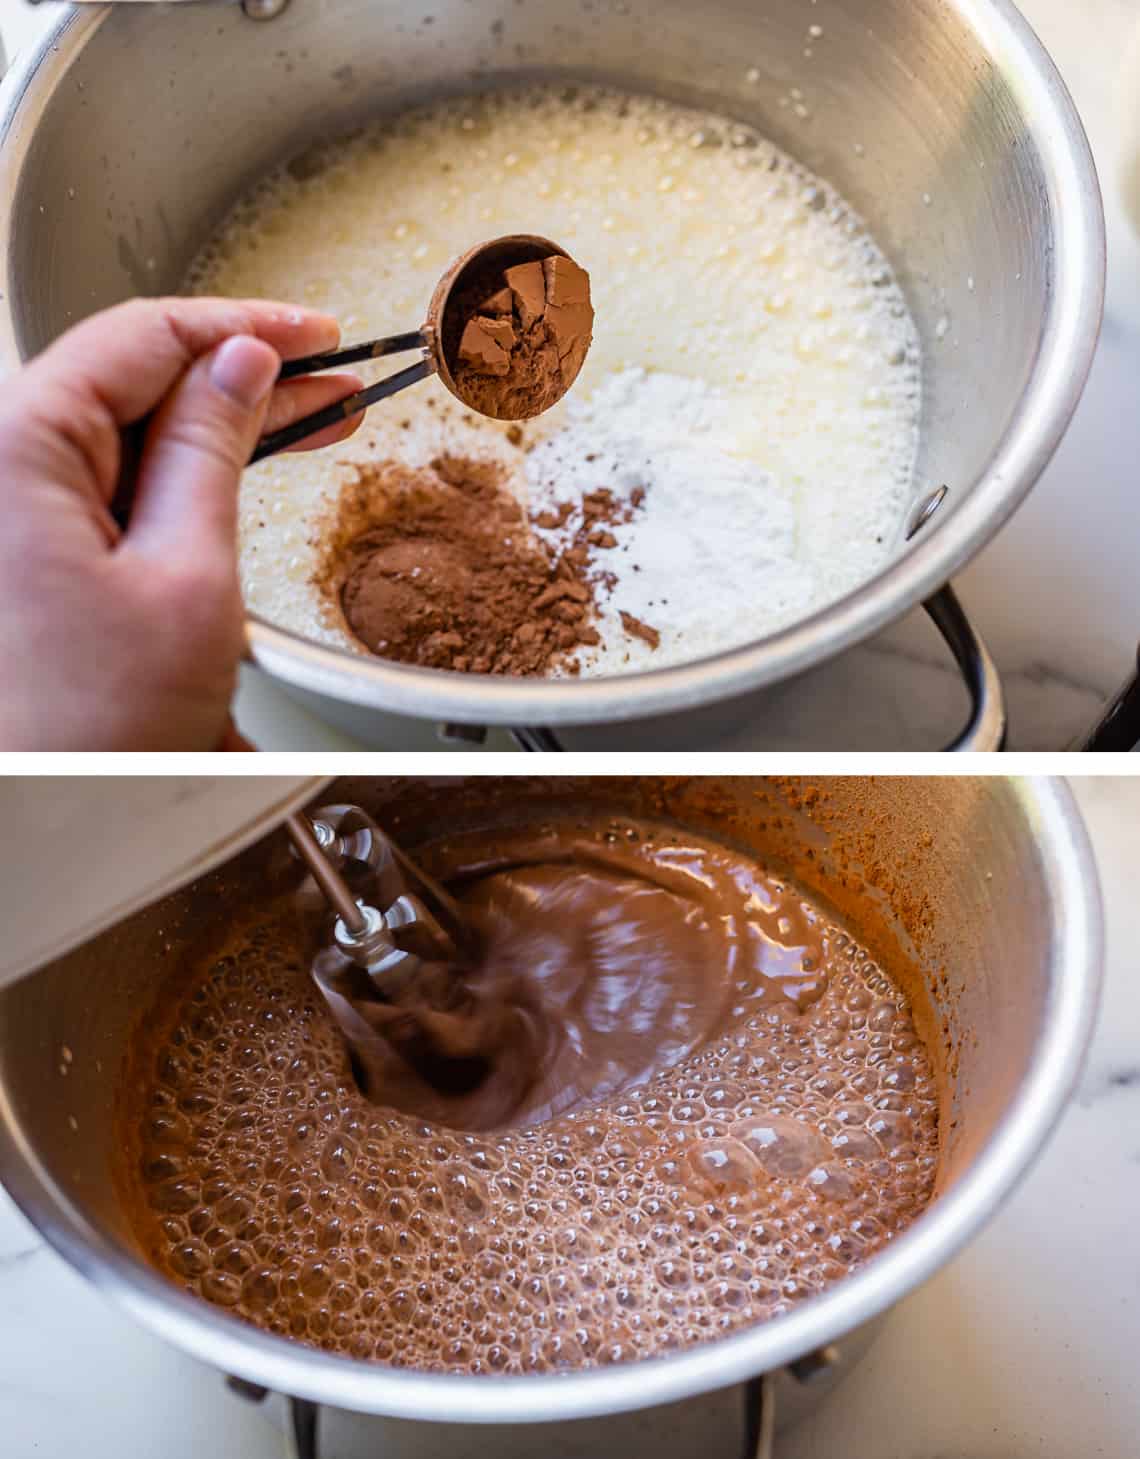 adding cocoa to a pot with beaten eggs, then mixing in cocoa.